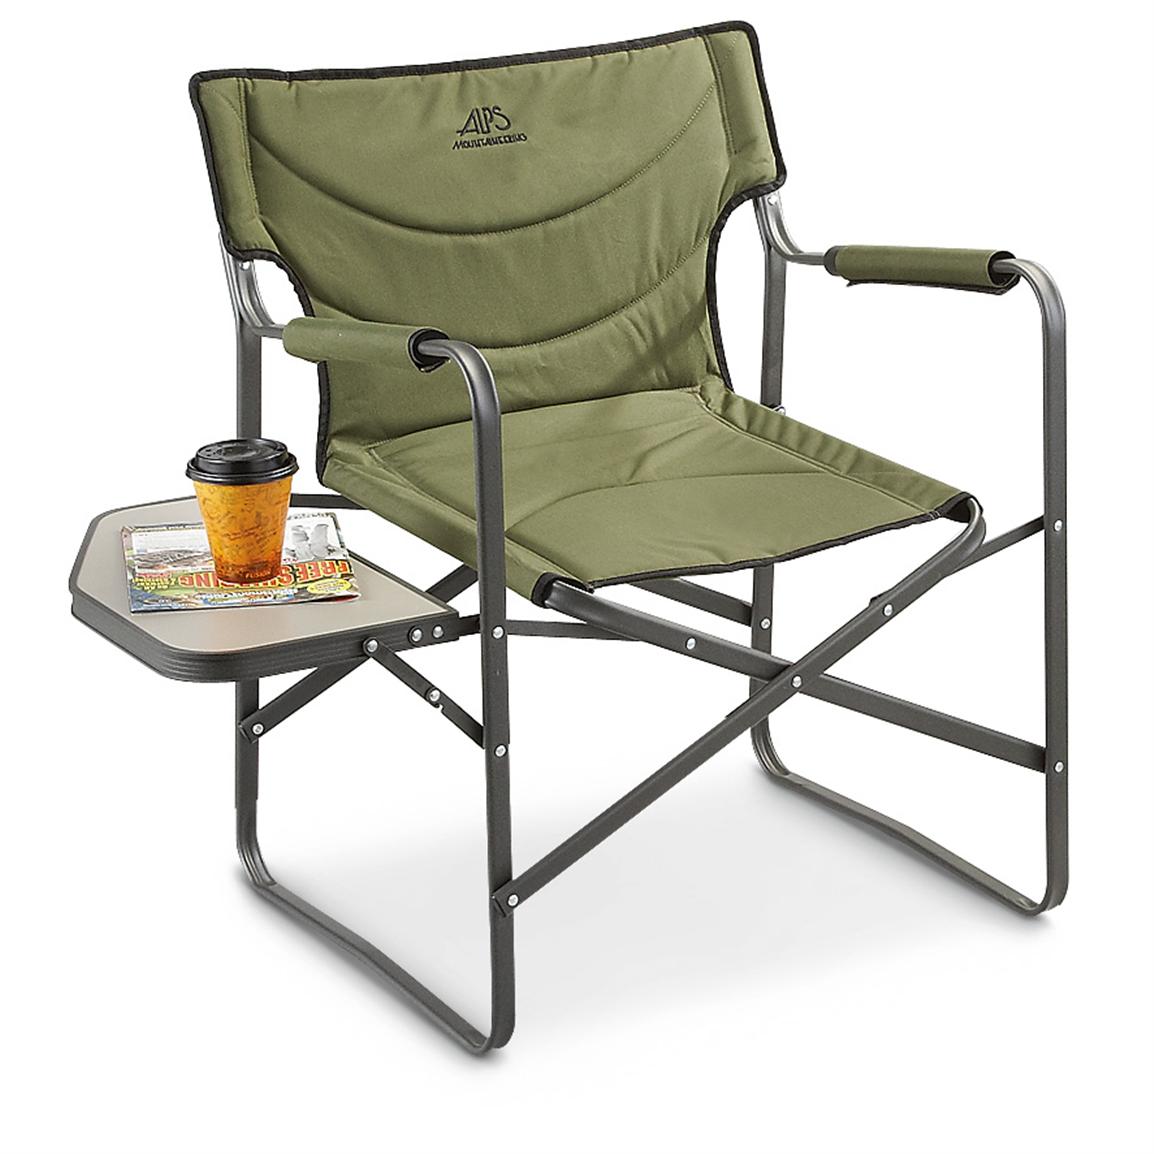 ALPS Creekside Foldable Camp Chair, Green - 236509, Chairs at Sportsman